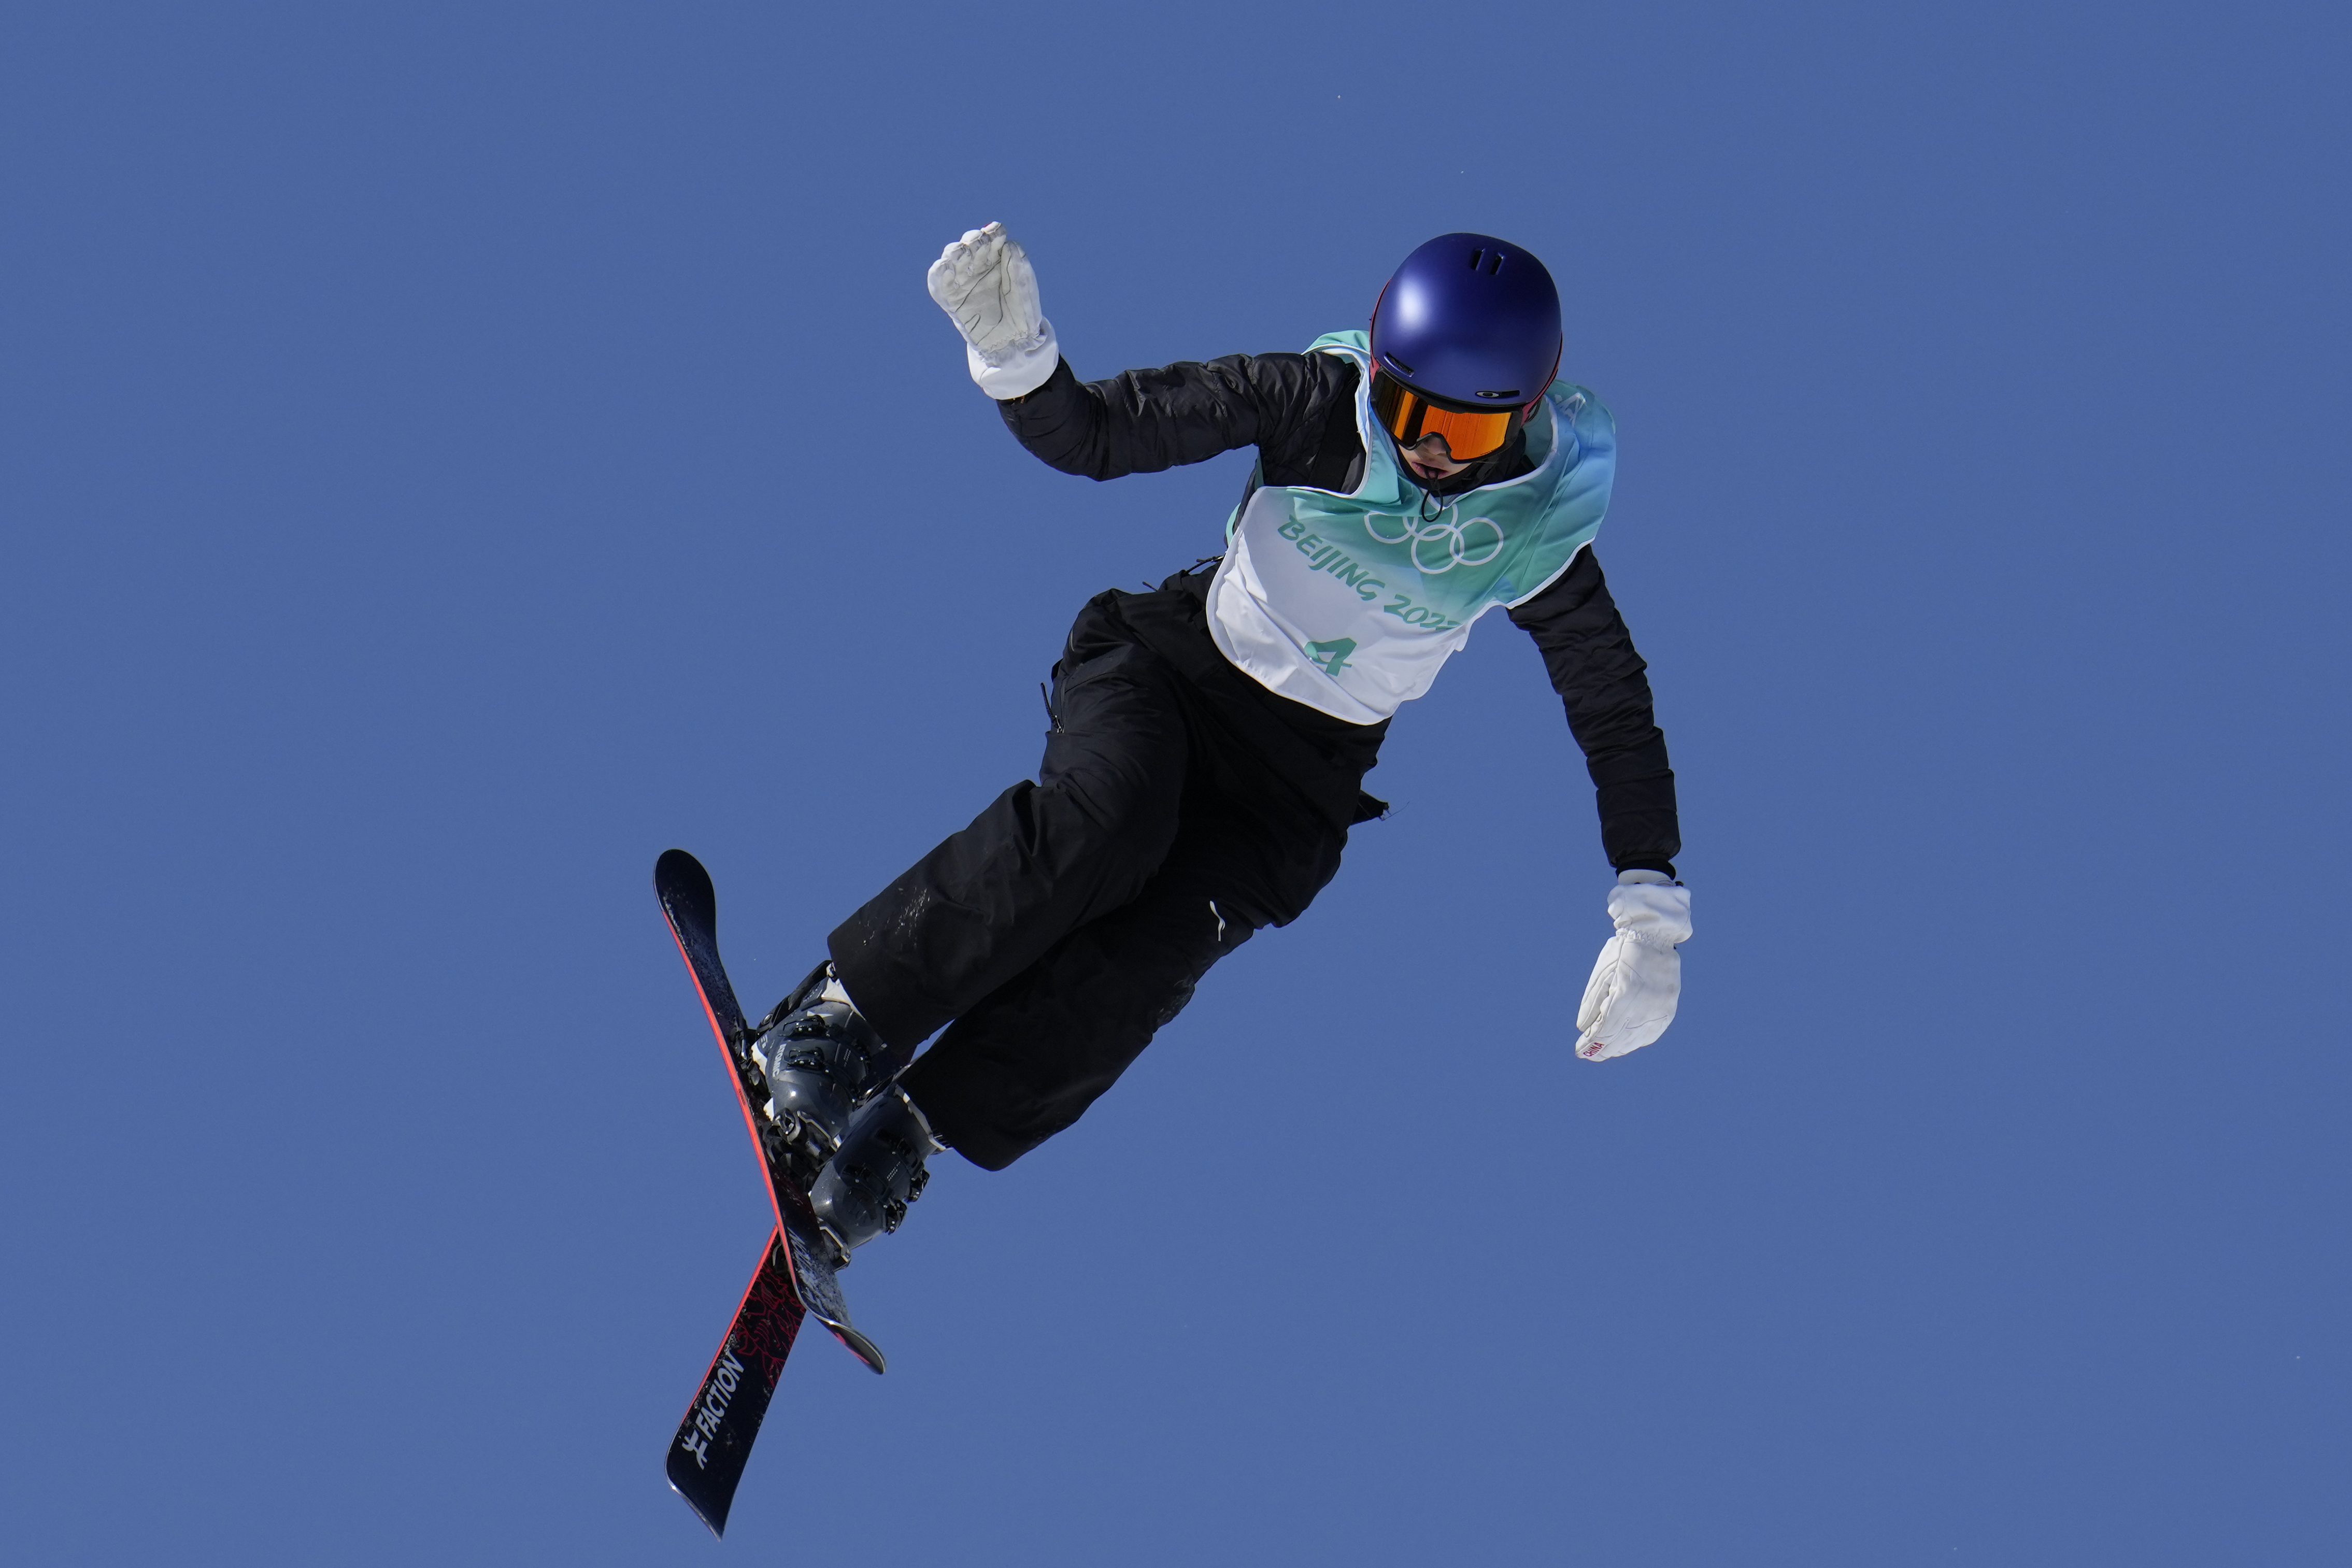 Eileen Gu: American freestyle ski champ competes for China in